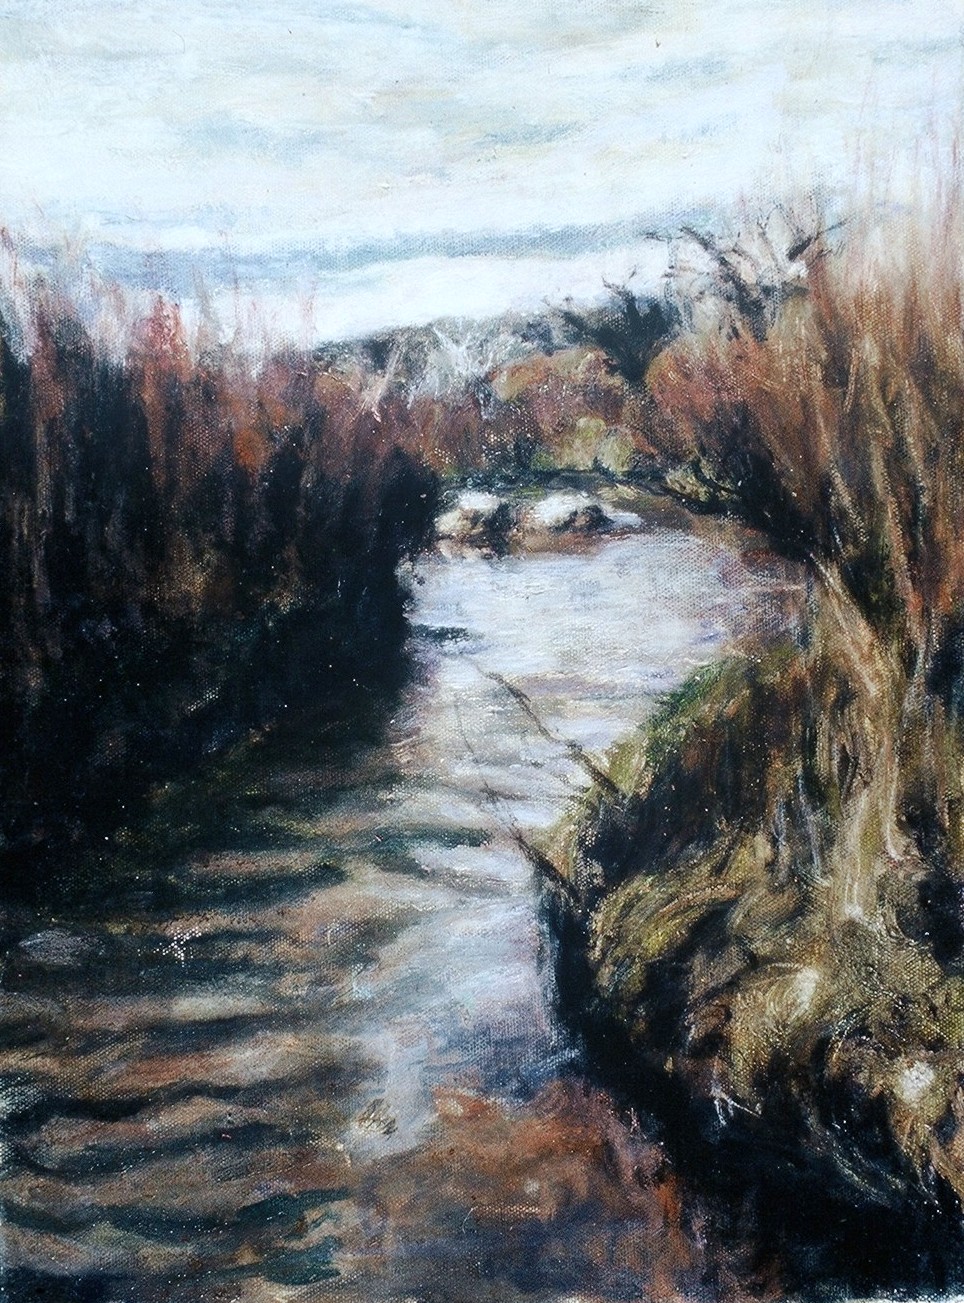 Prairie Dog Fork Red River-Acrylic on canvas-16h x 12 w in